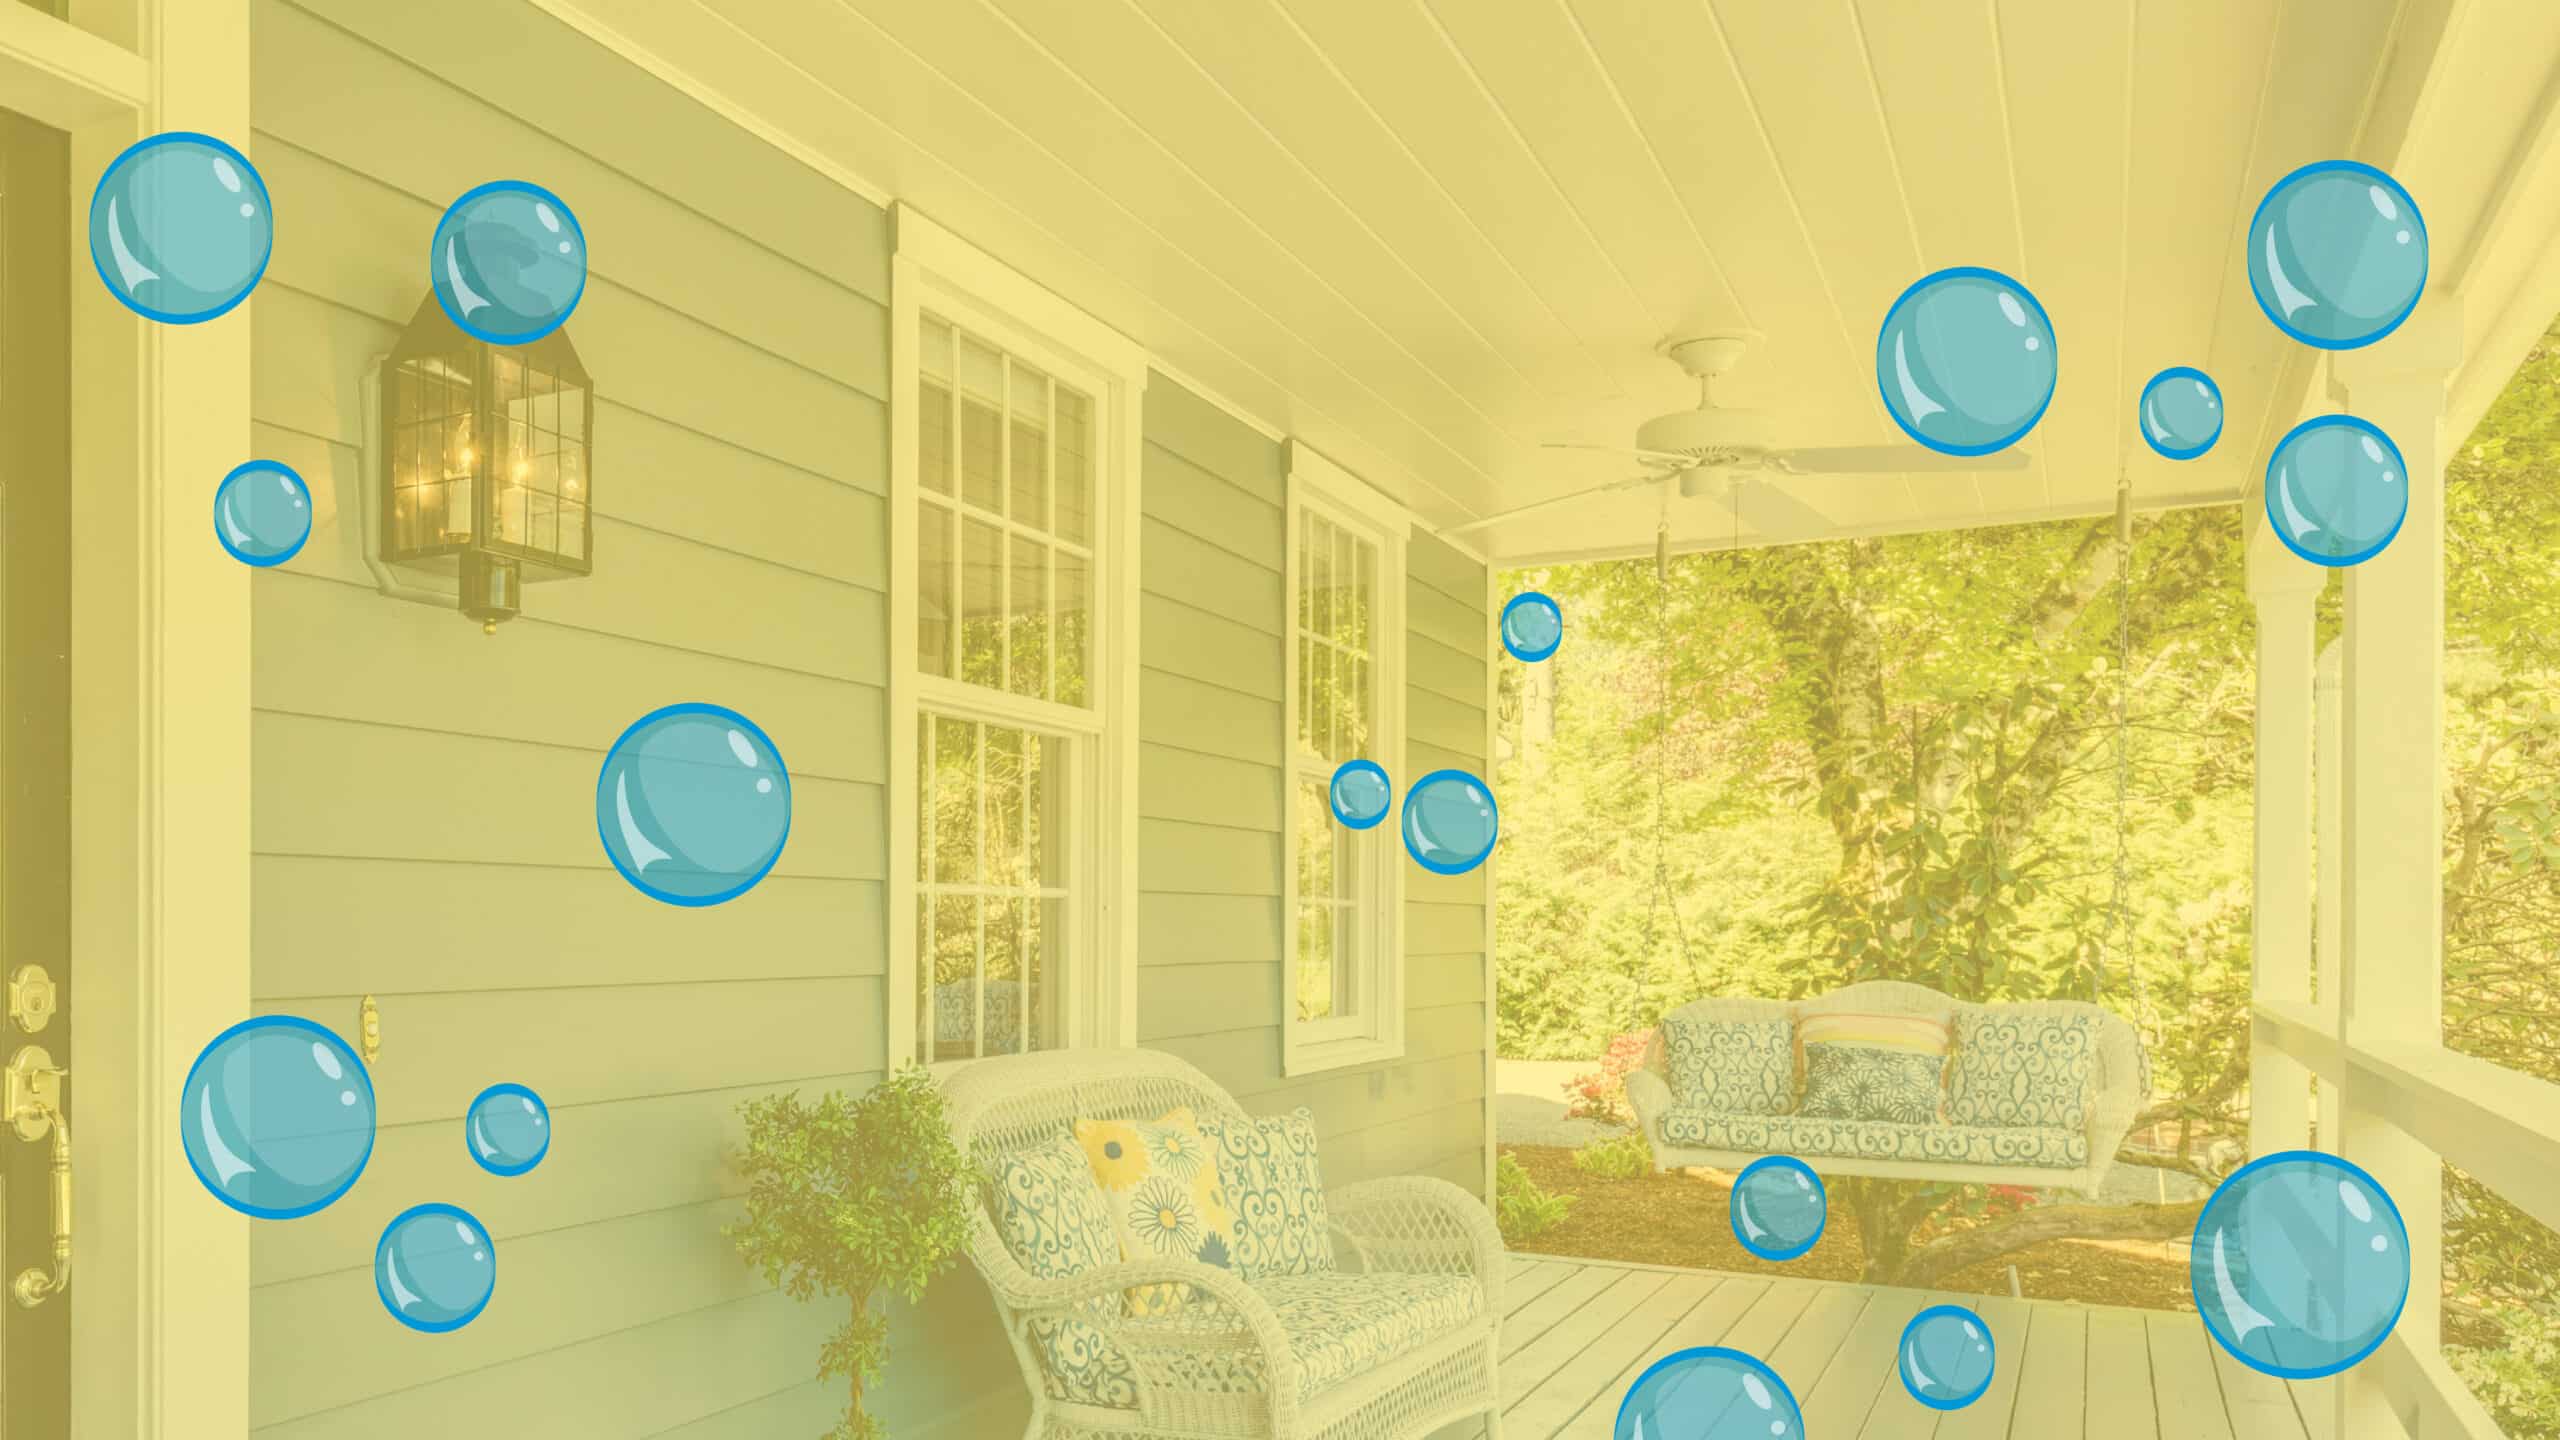 A porch sparkles after being cleaned by Simple Scrub products. Simple Scrub's yellow hue and animated bubbles overlay the image.